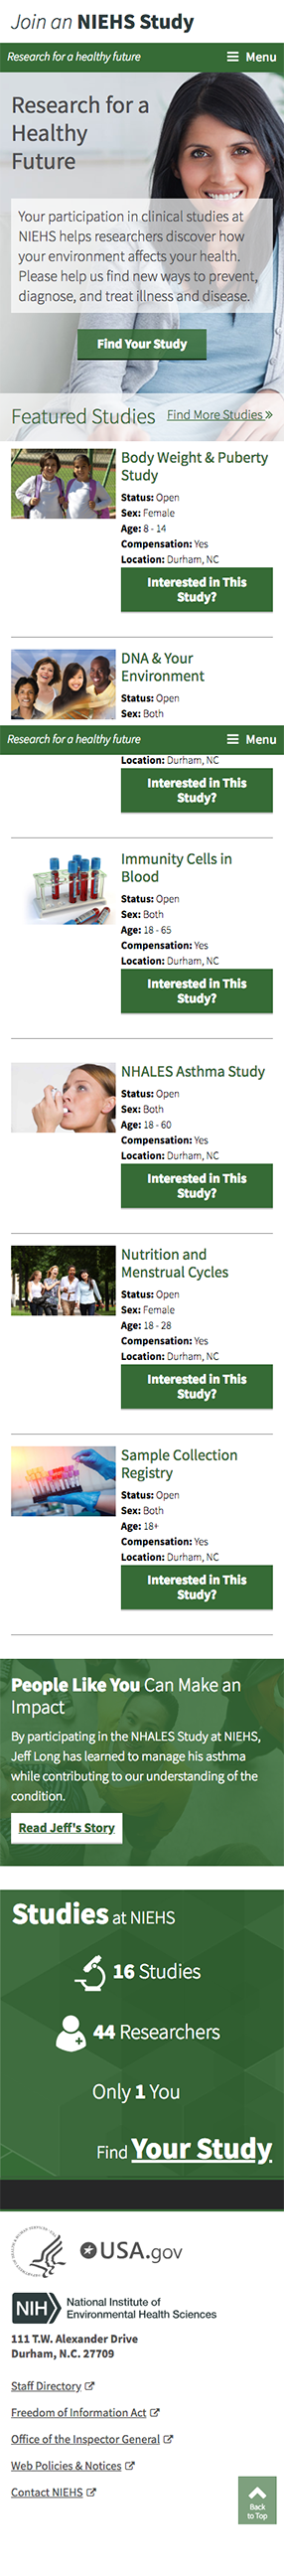 Join an NIEHS Study website mobile view